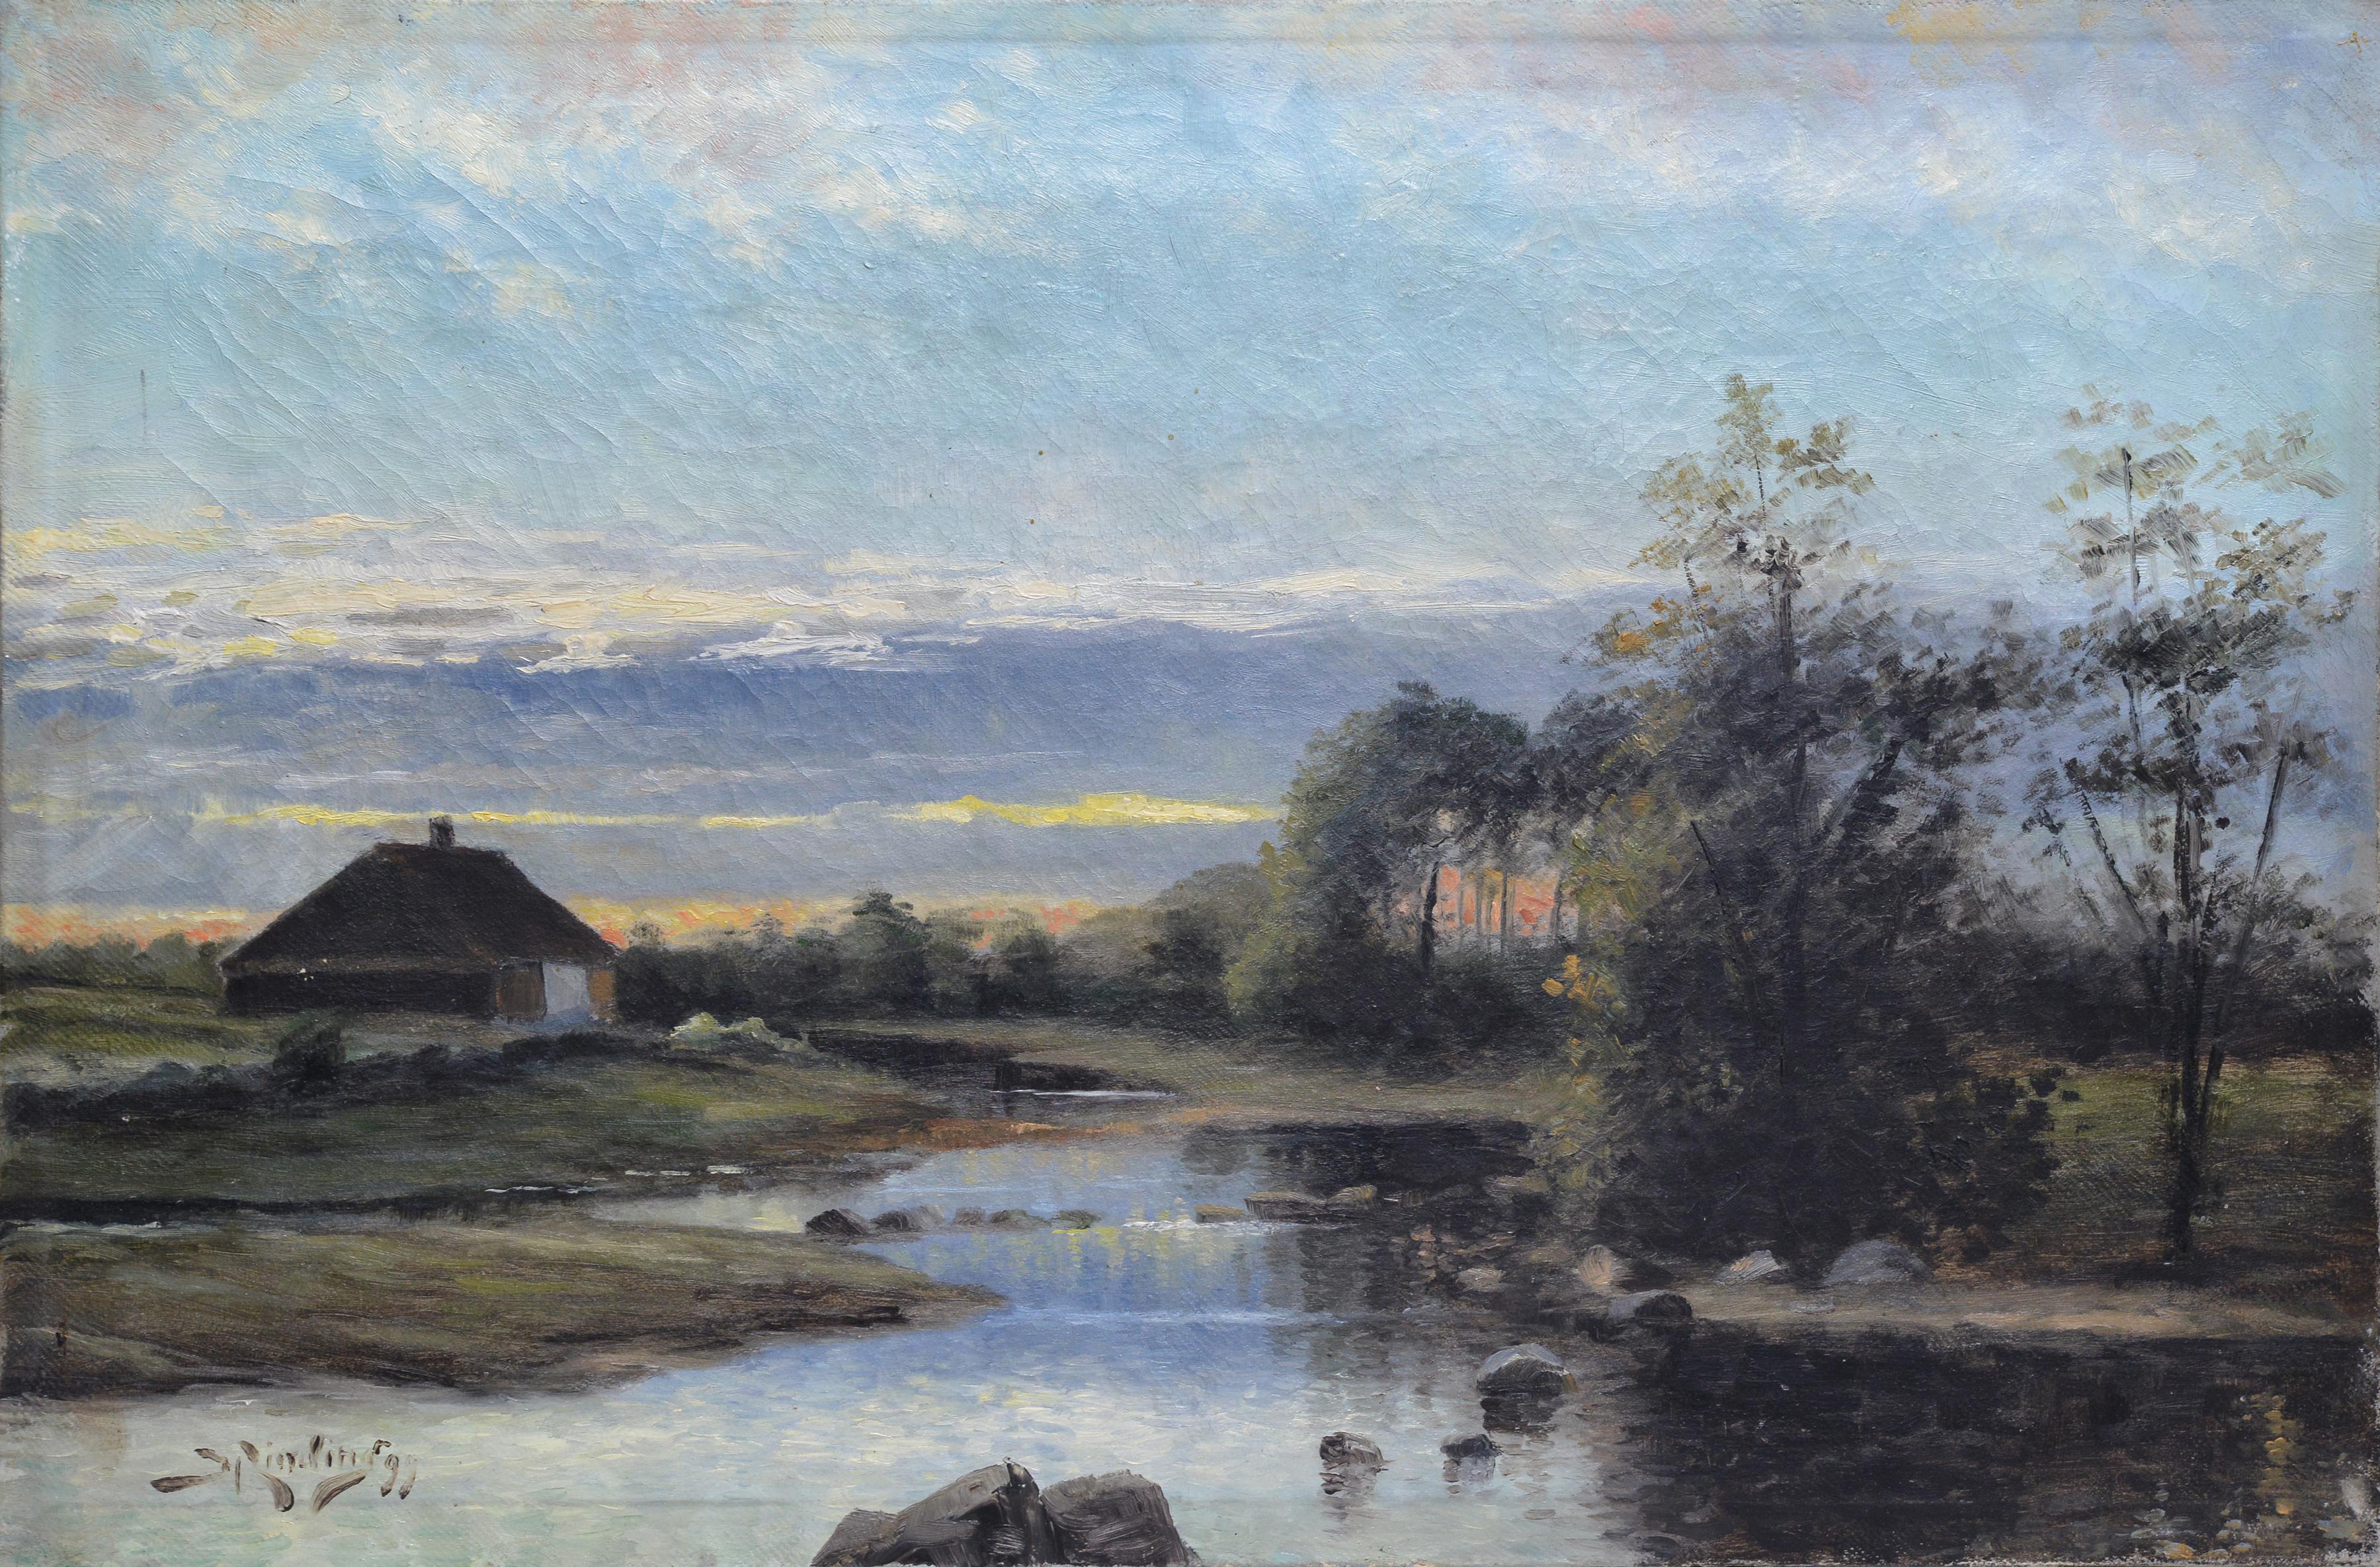 Evening Twilight on River 1899 Scandinavian Oil Painting on Canvas Signed Framed - Brown Landscape Painting by Unknown